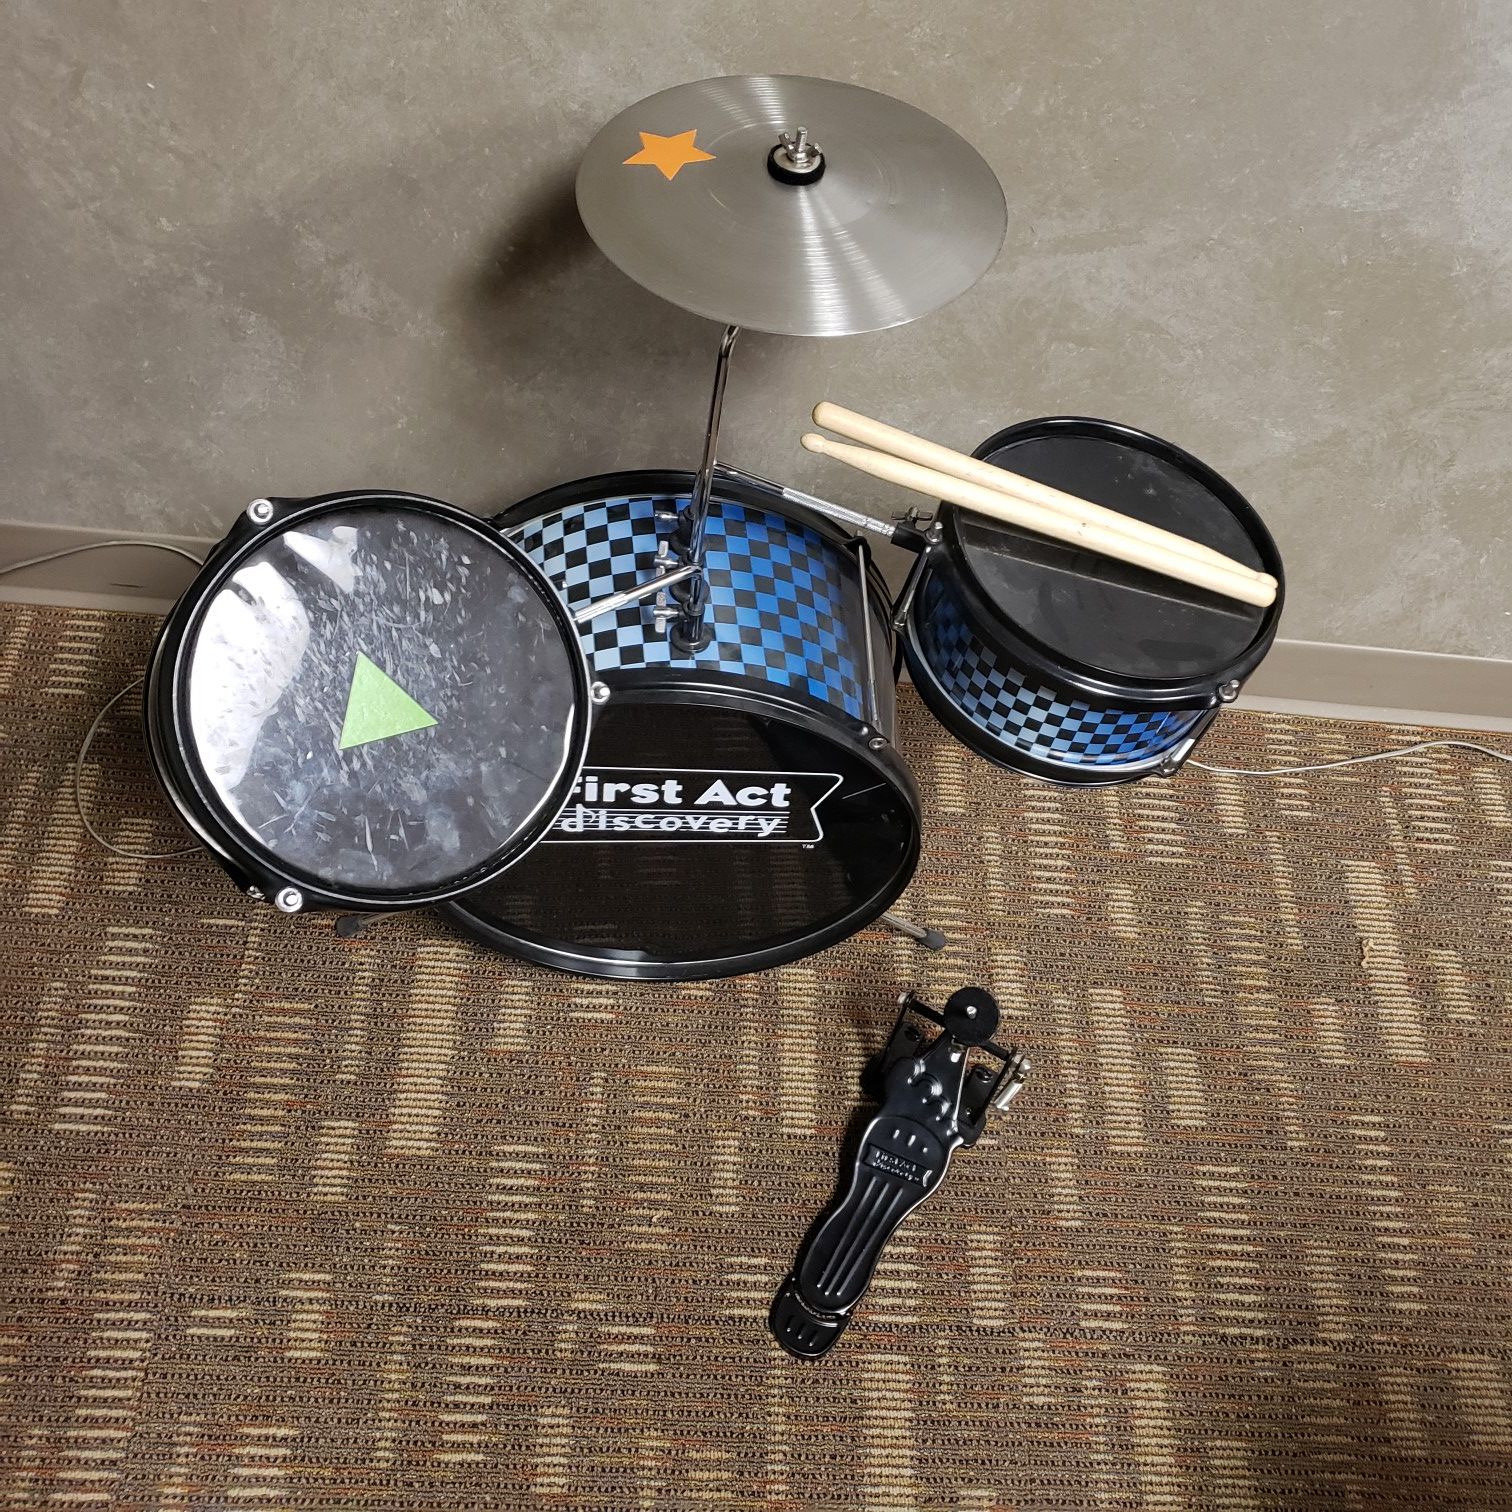 First Discovery Drum set